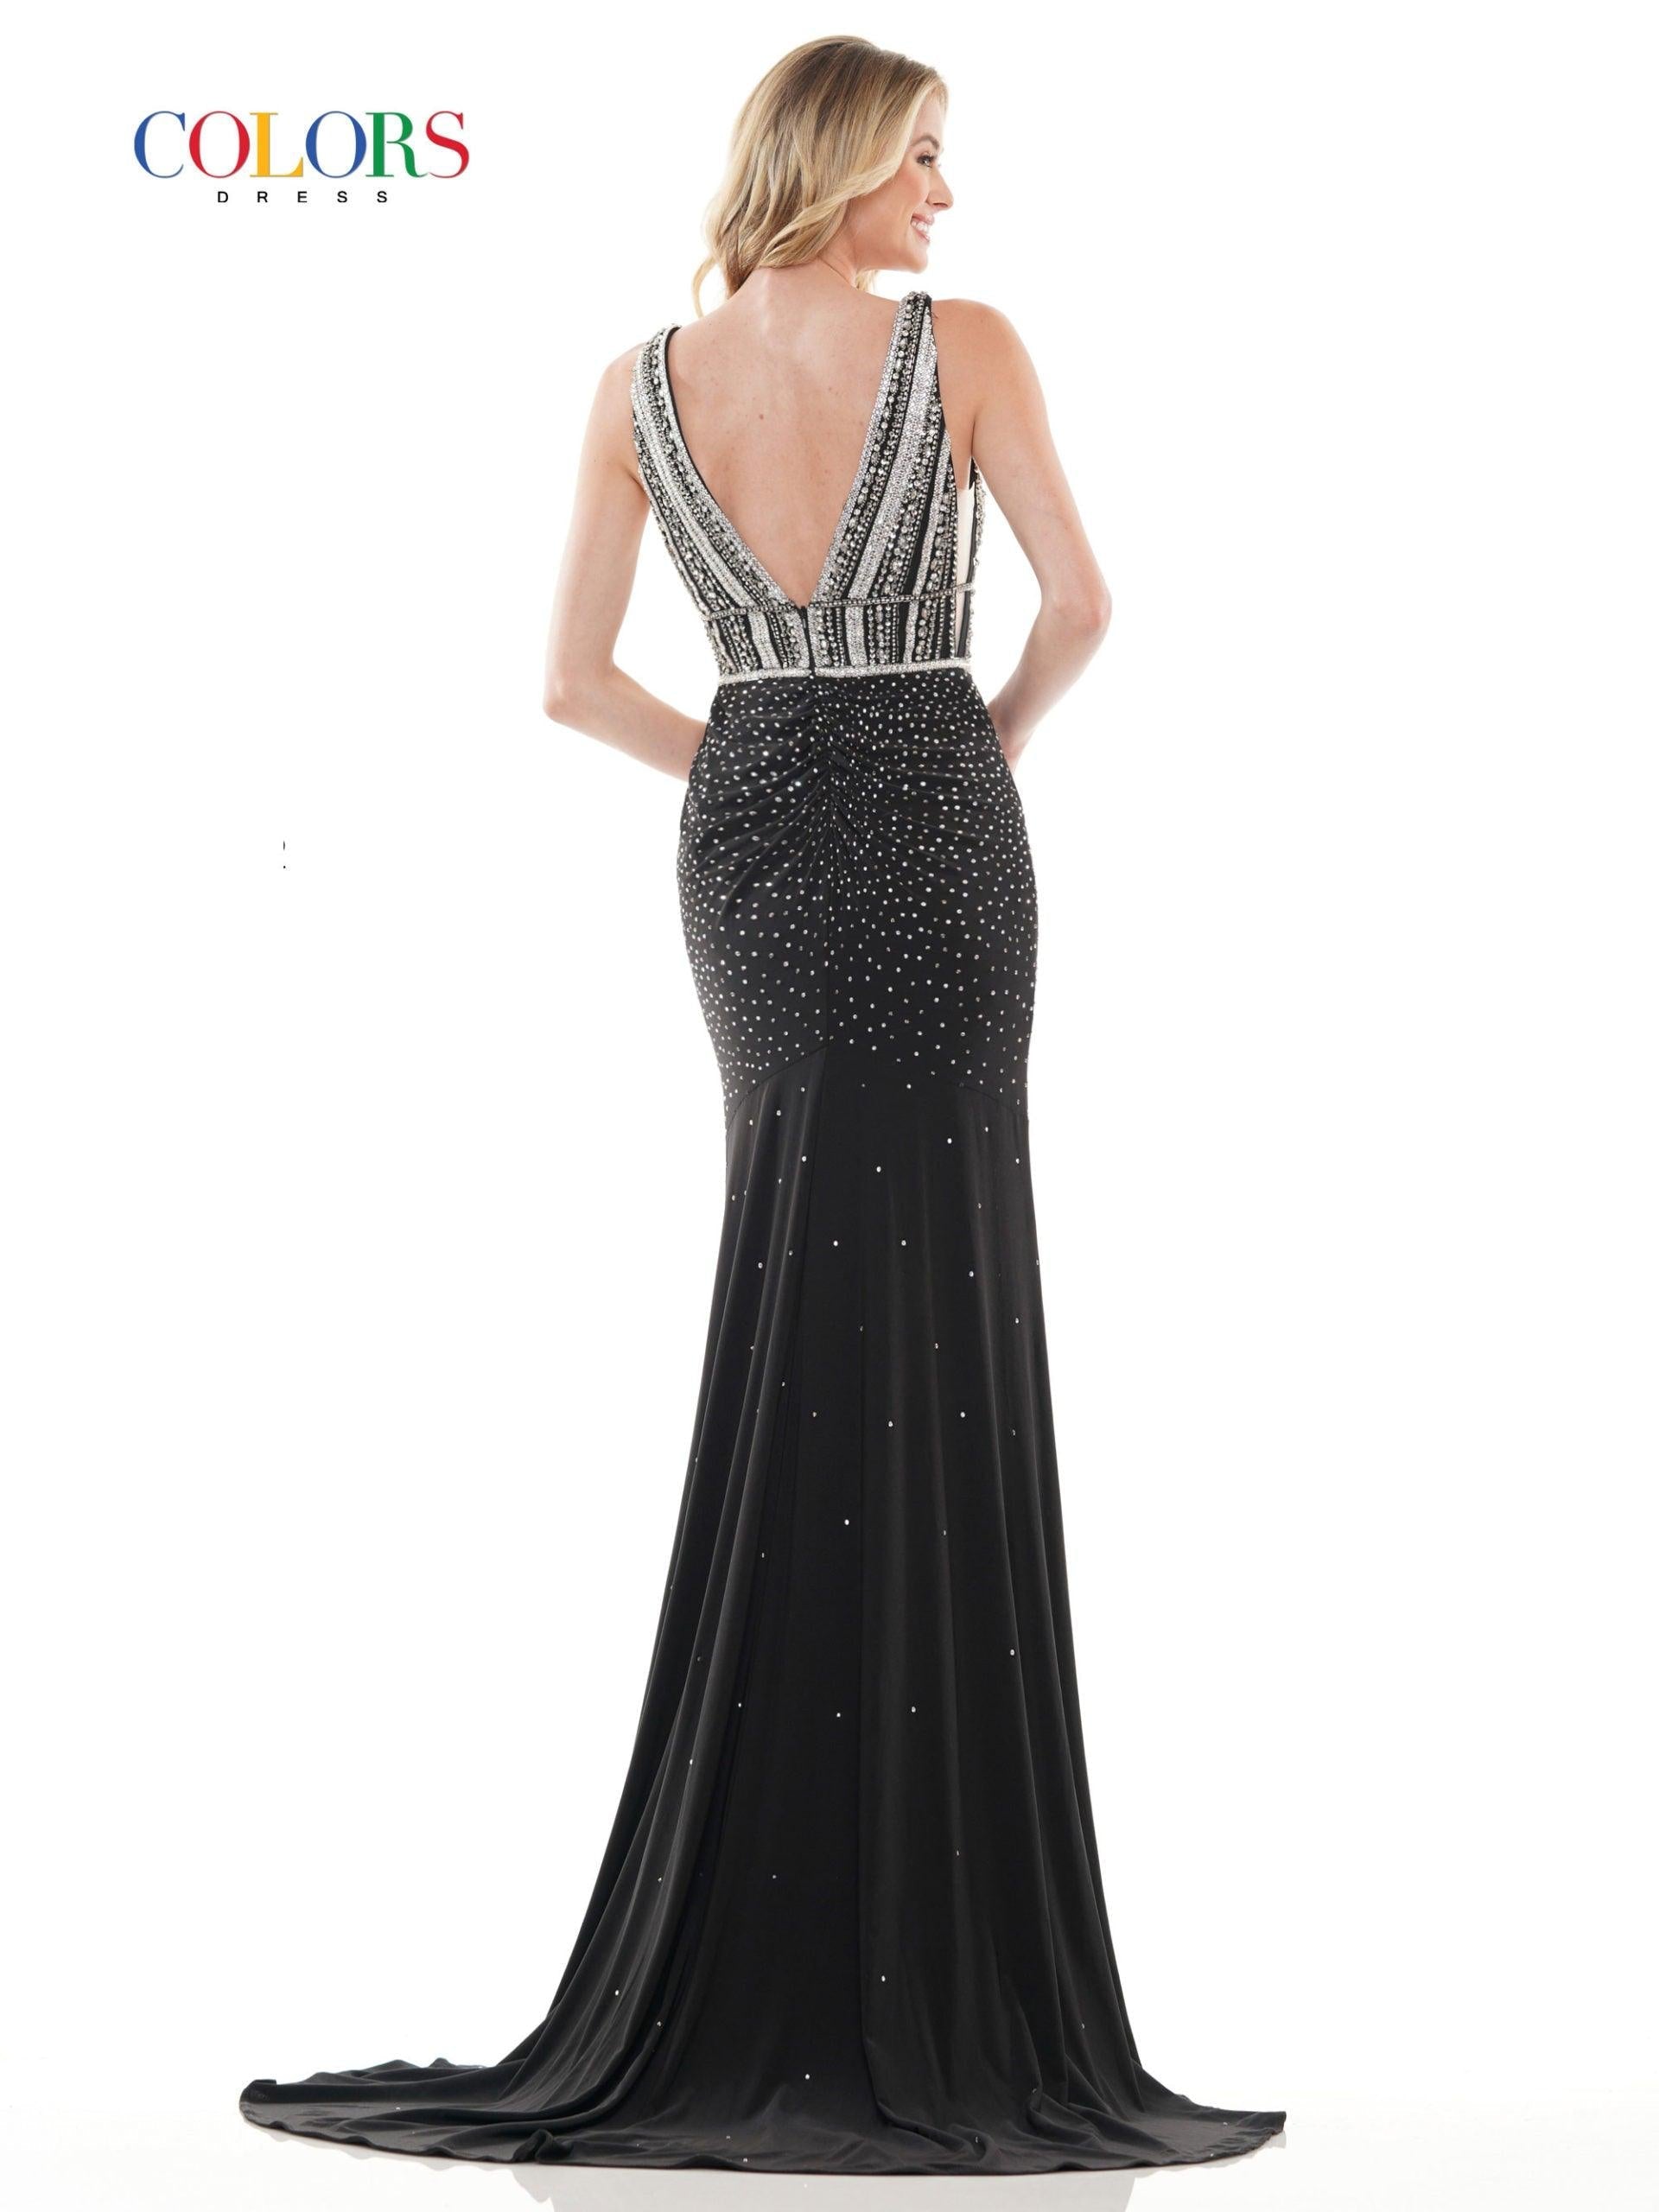 Colors Prom Long Sleeveless Formal Dress 2716 - The Dress Outlet